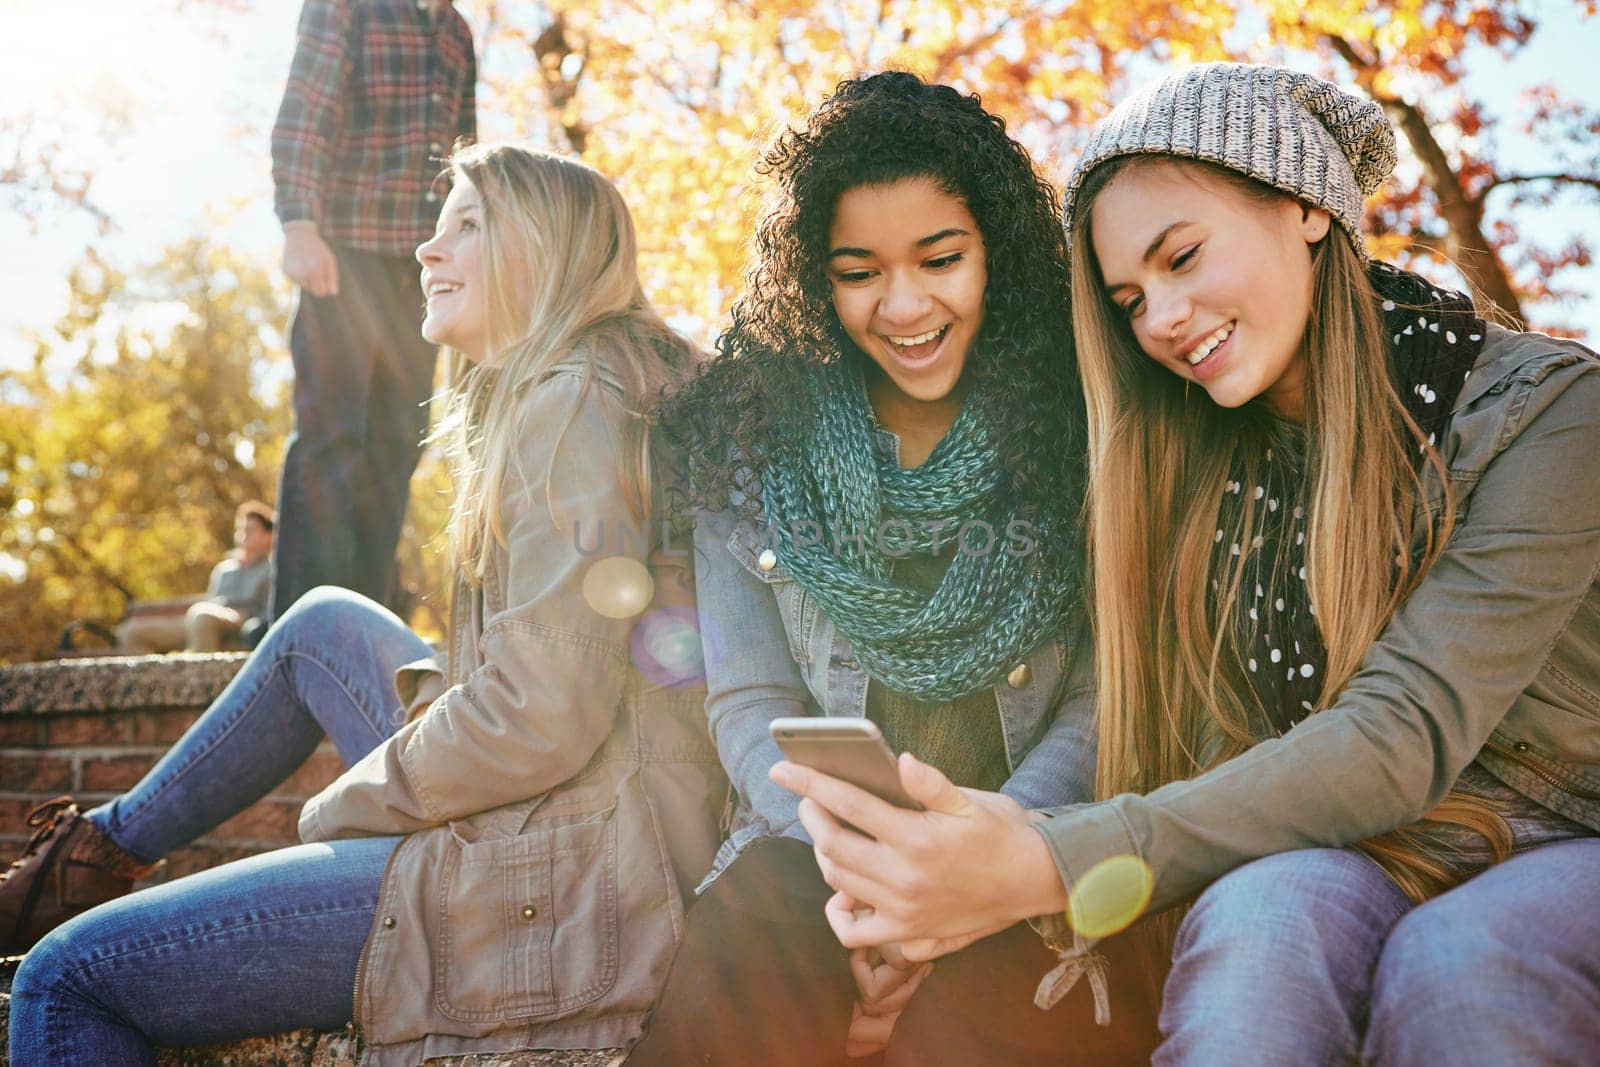 Phone, teenager gossip or friends in park with smile for holiday vacation on funny social media post or meme. Happy people, drama or gen z girls in nature talking, speaking or laughing at comedy joke by YuriArcurs